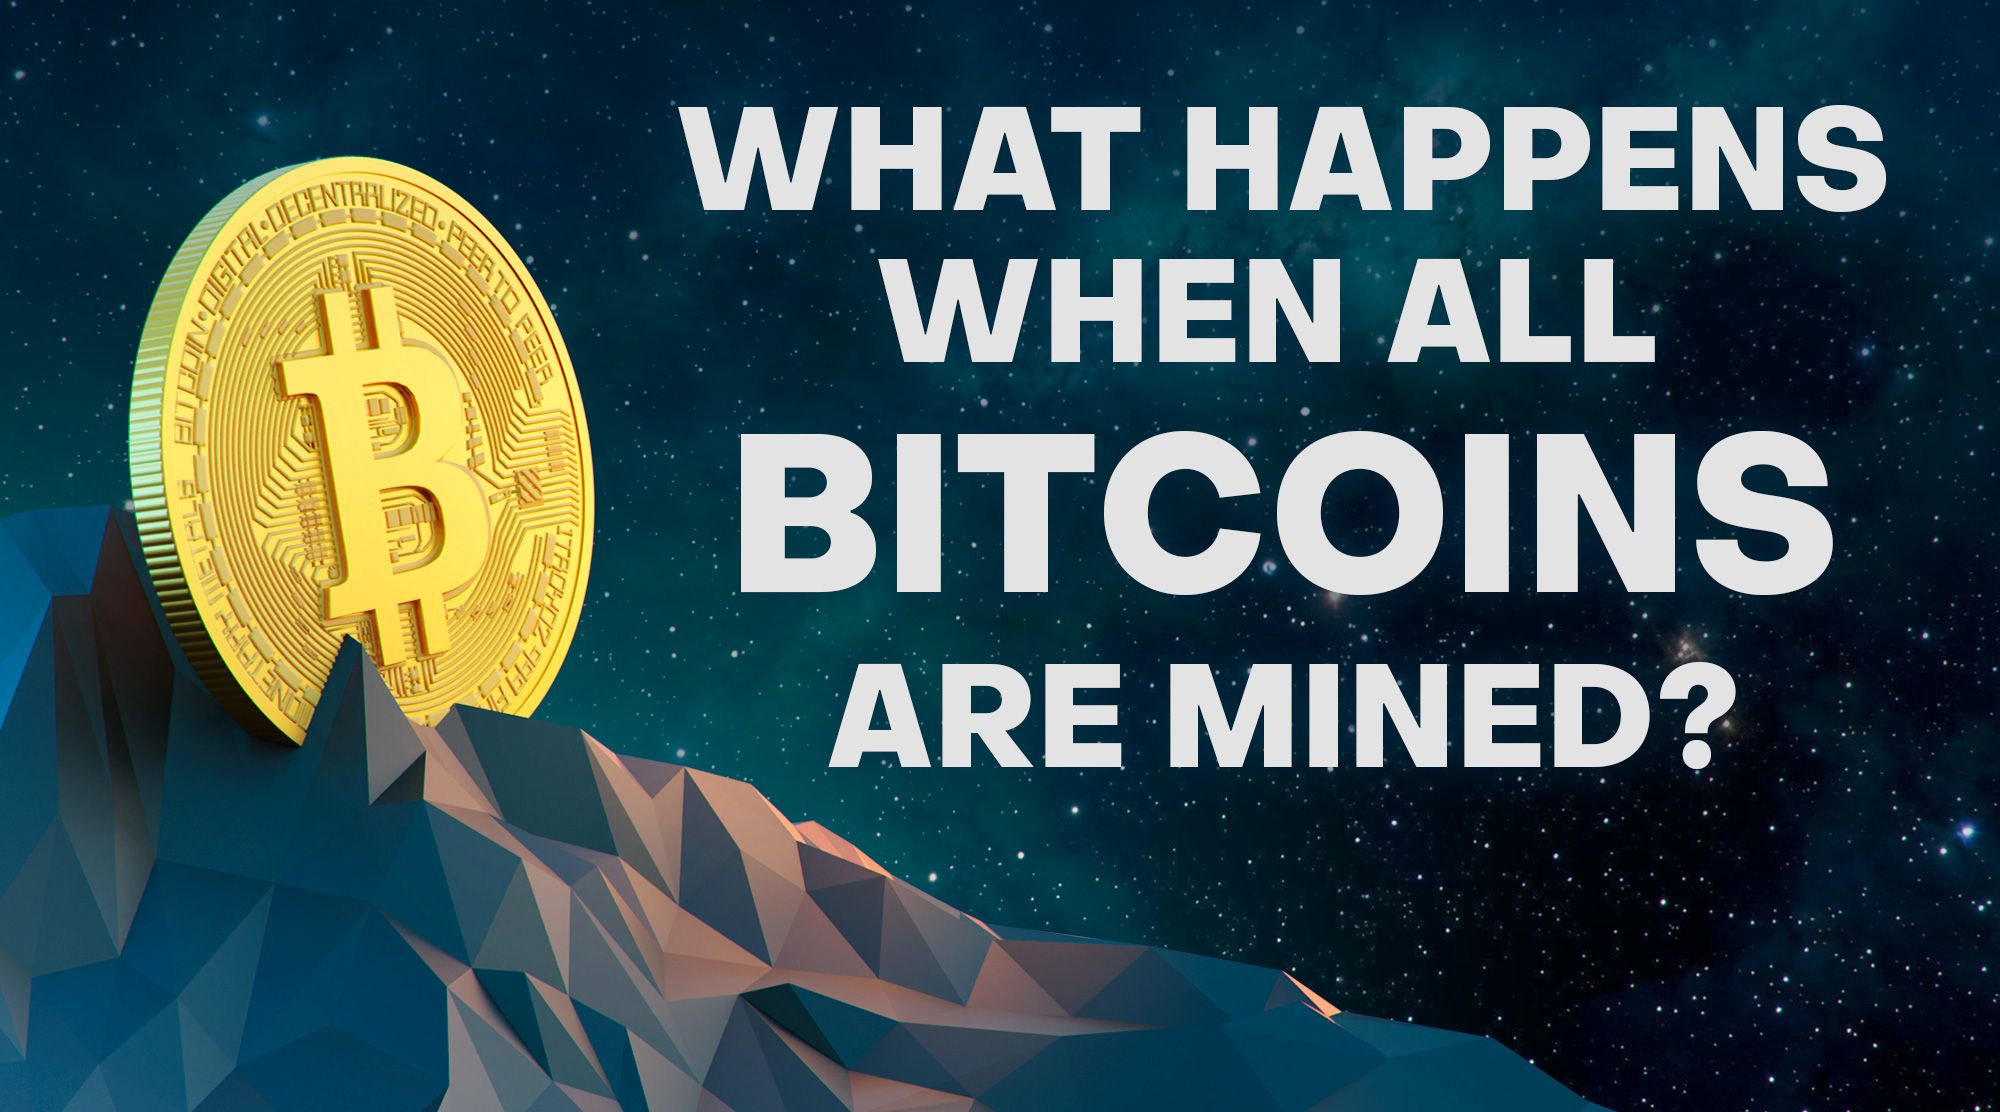 What Happens When All Bitcoins Are Mined?